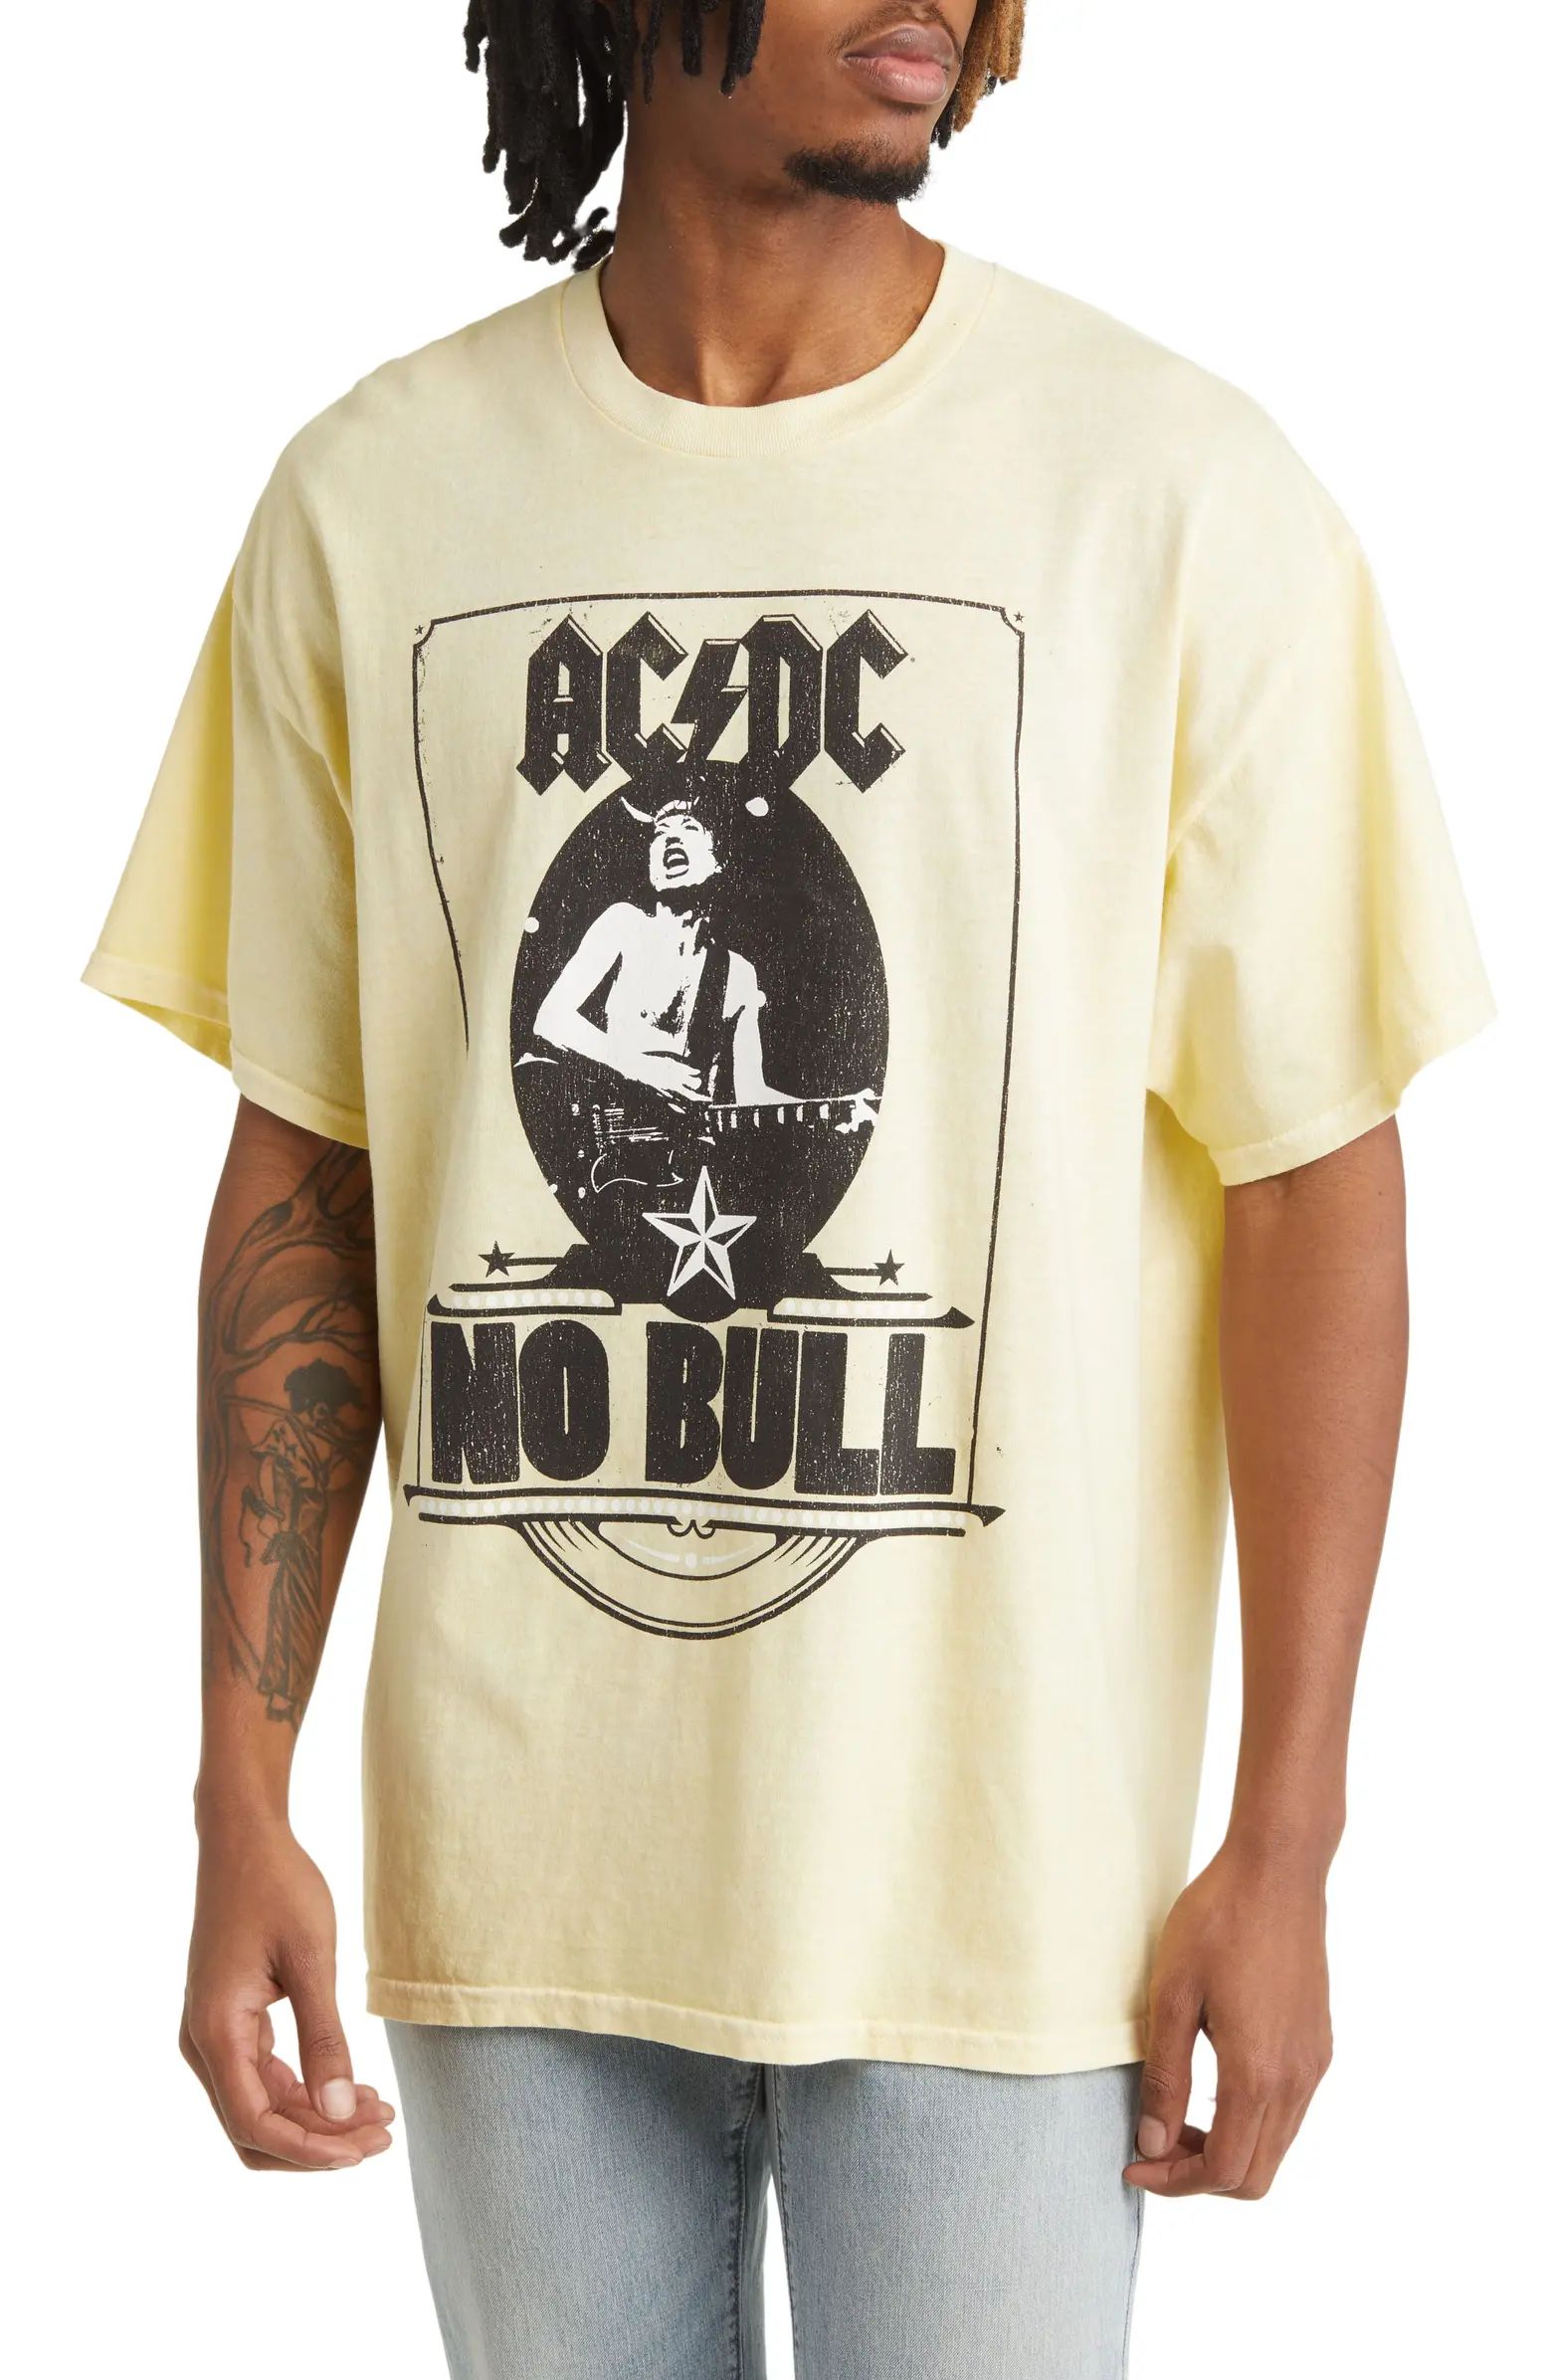 No Bull Cotton Graphic Tee | Nordstrom